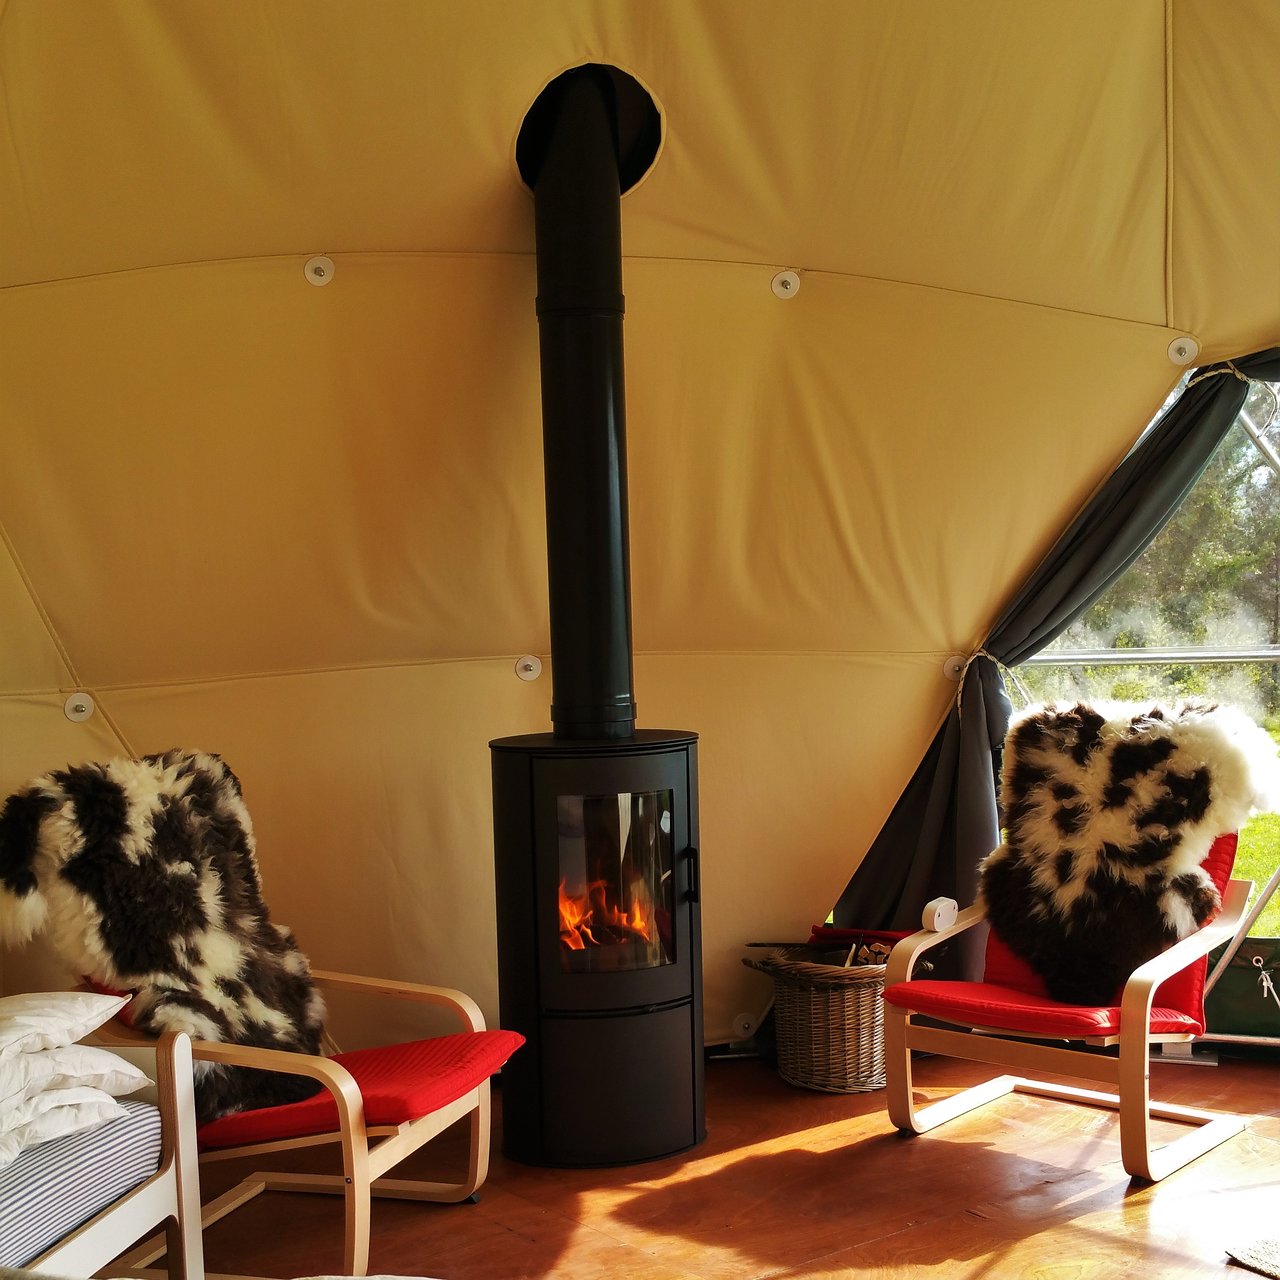 Fireplaces Birmingham Best Of top Of the Woods Camping & Glamping Updated 2019